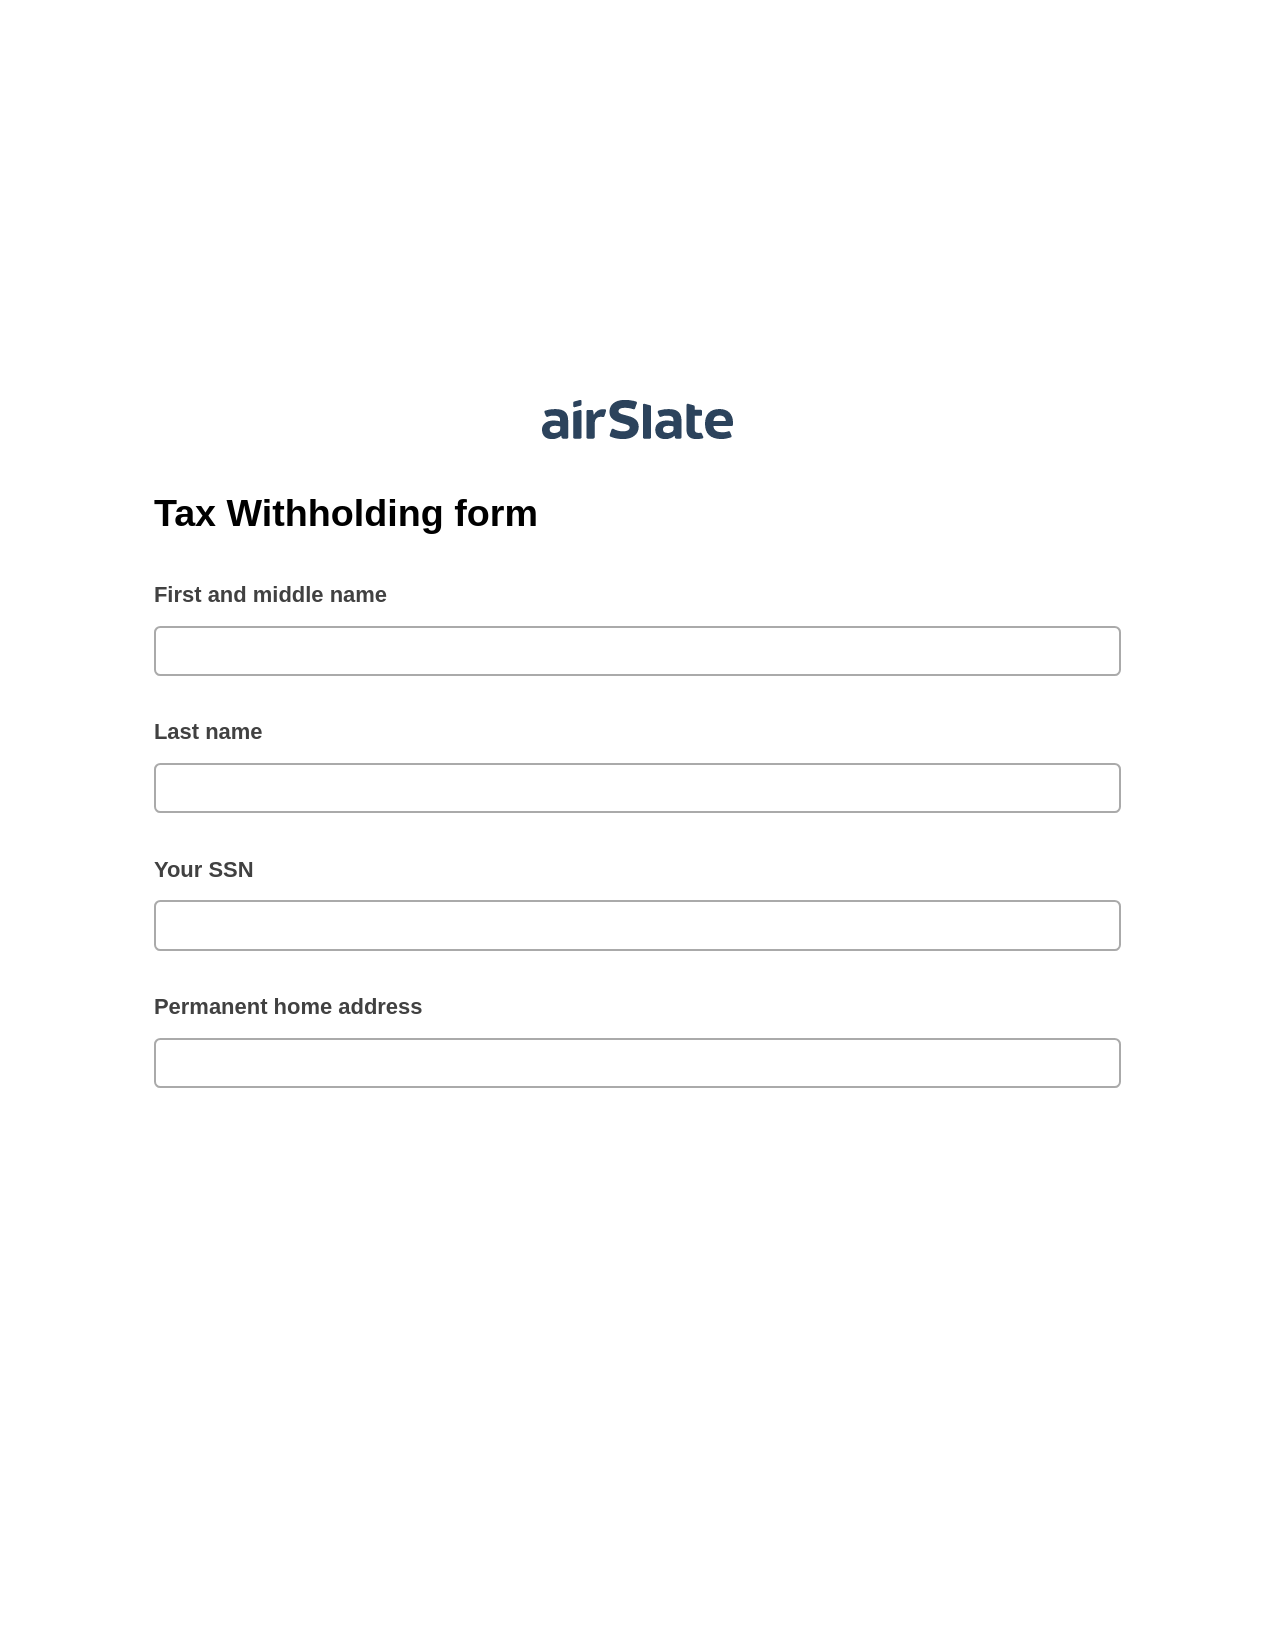 Multirole Tax Withholding form Pre-fill from CSV File Bot, Mailchimp Add Recipient to Audience Bot, Export to Excel 365 Bot